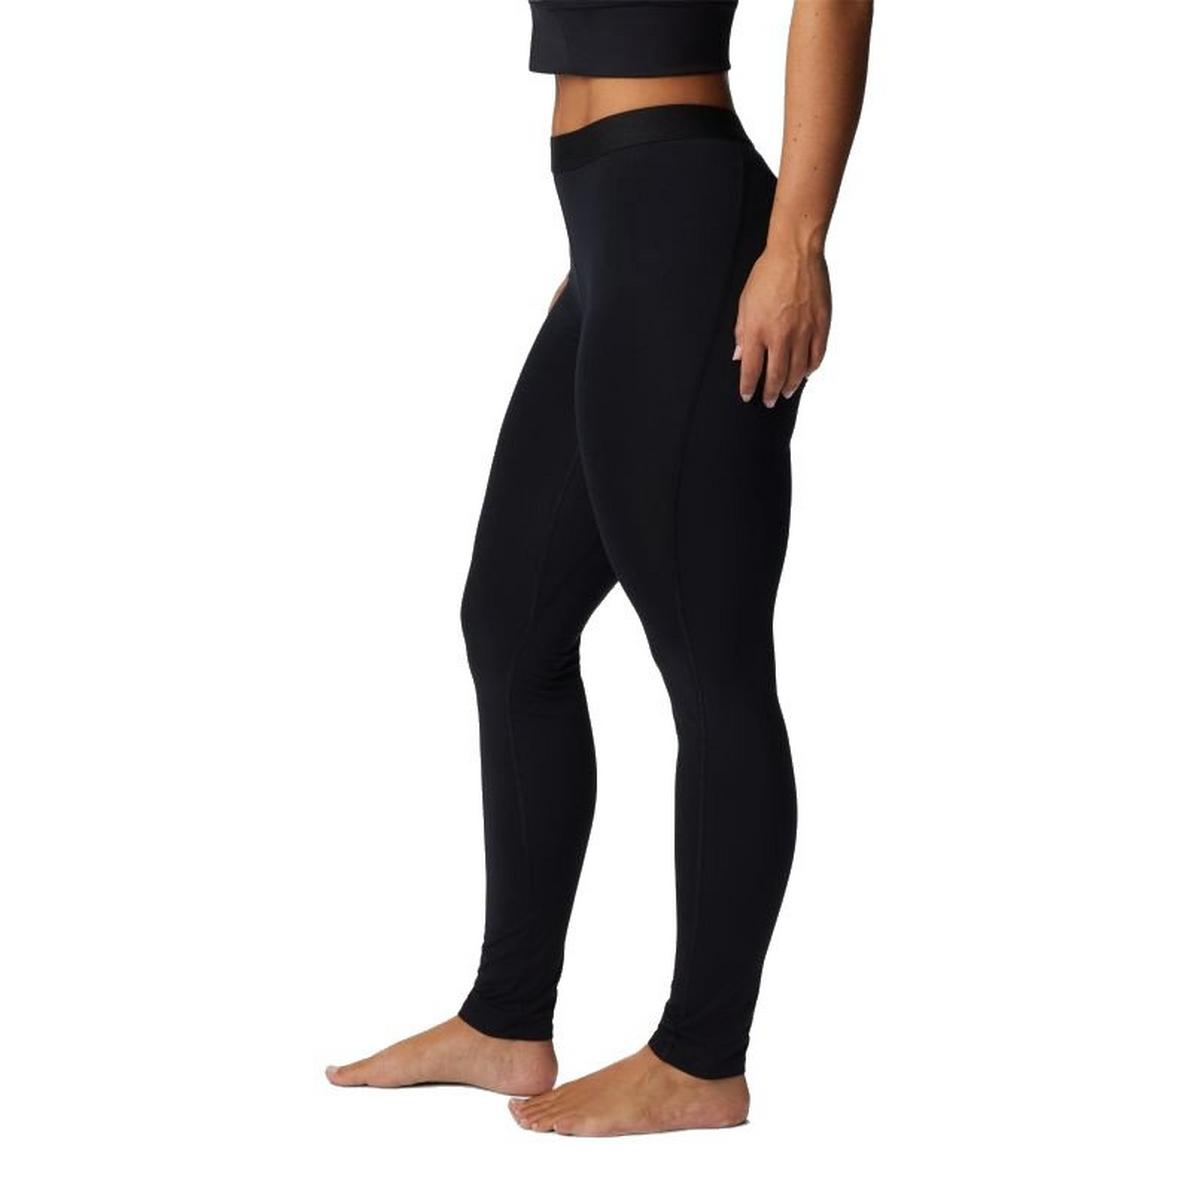 Columbia Women's Midweight Stretch Tights - Black